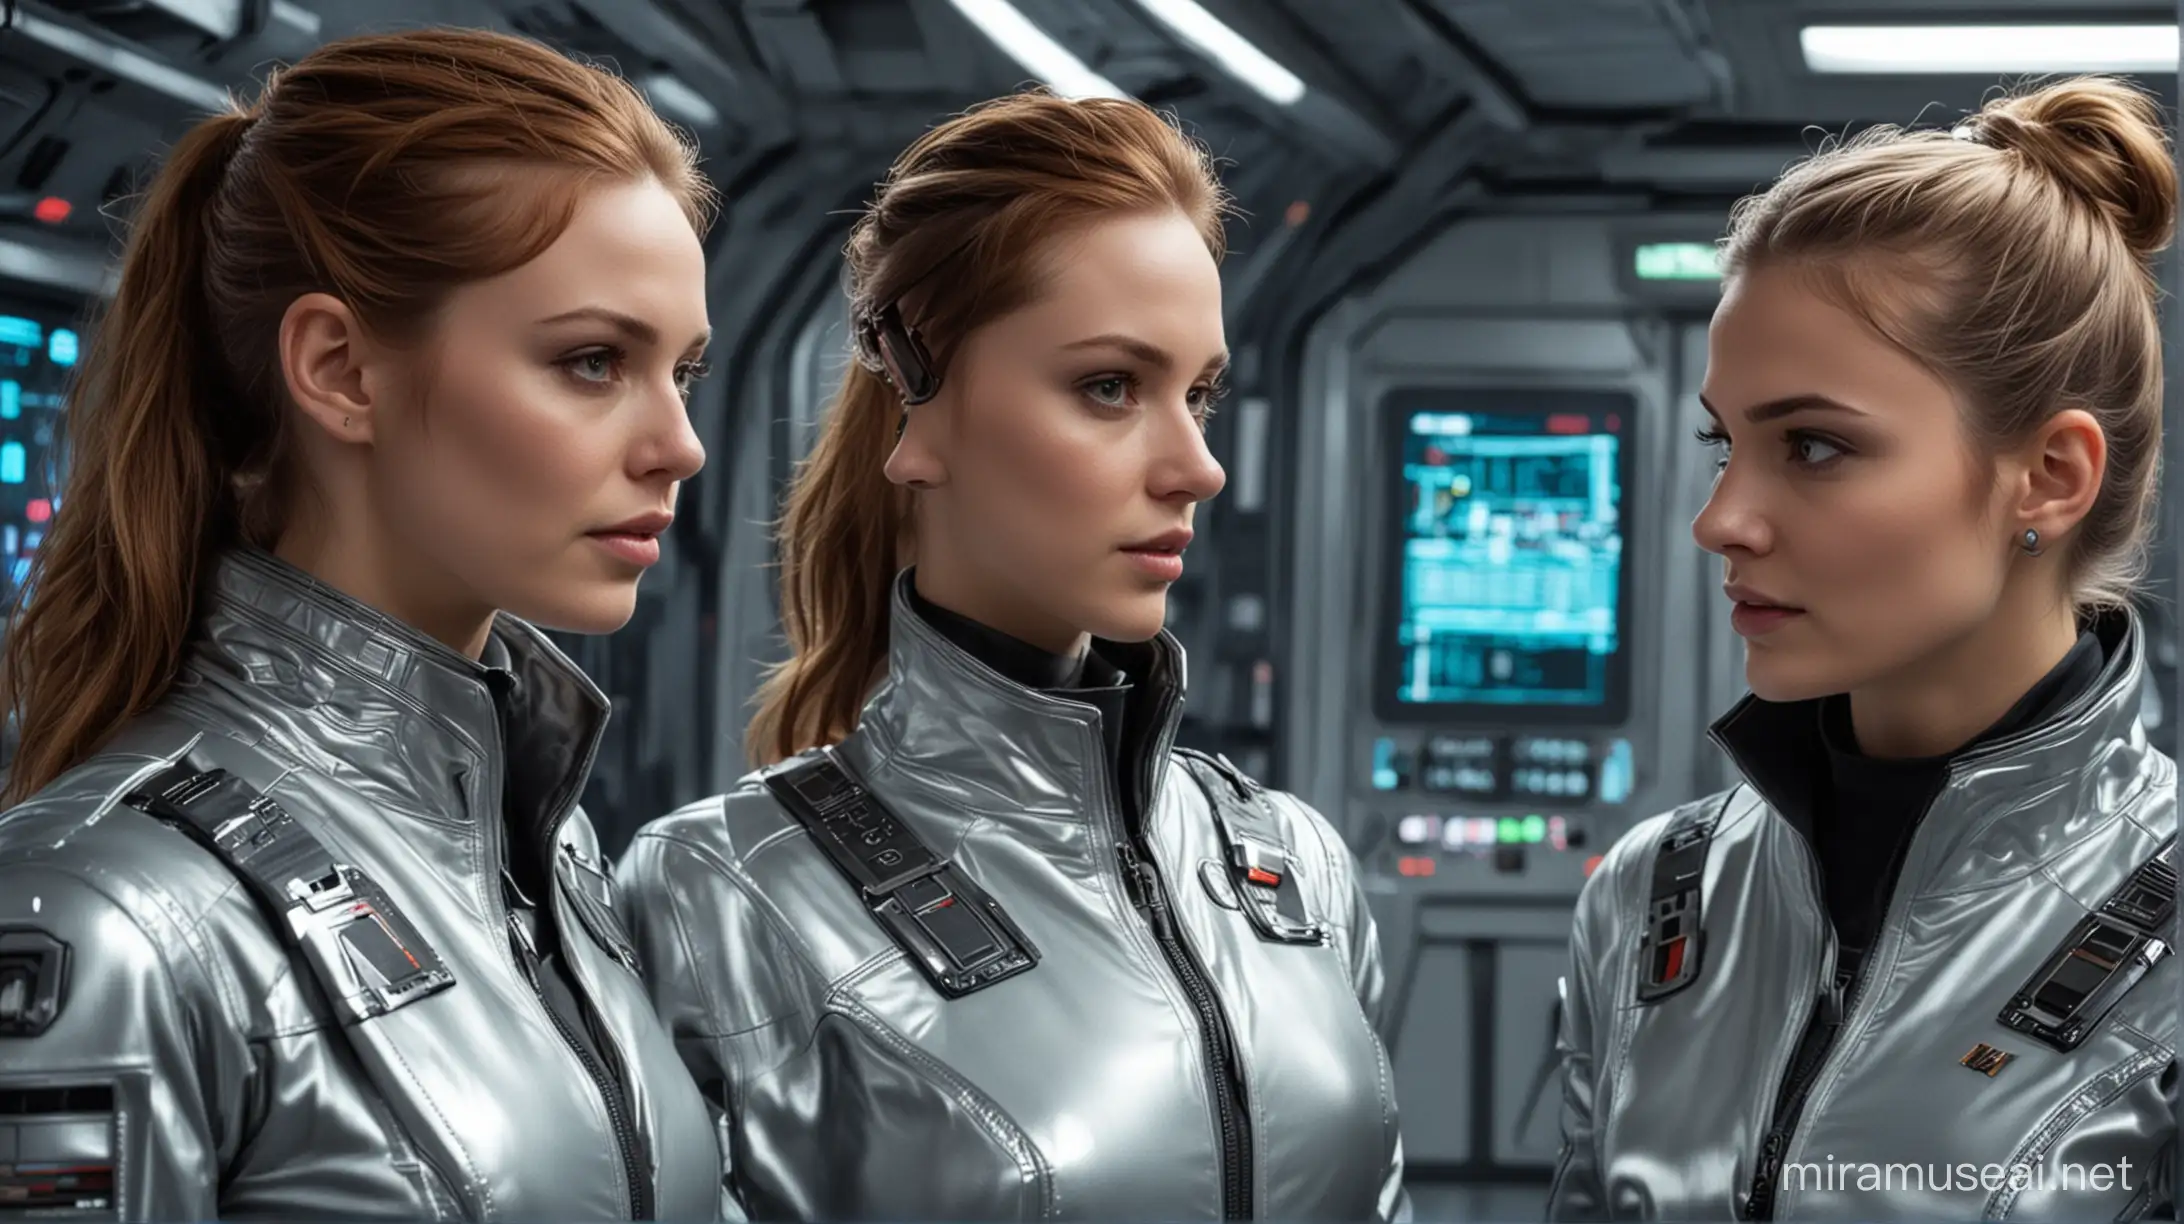 Within the confines a command room of sci-fi starship, ((two young women)), european full faces, glossy silver jackets, engage in an intriguing conversation, their expressions exuding intelligence and camaraderie.